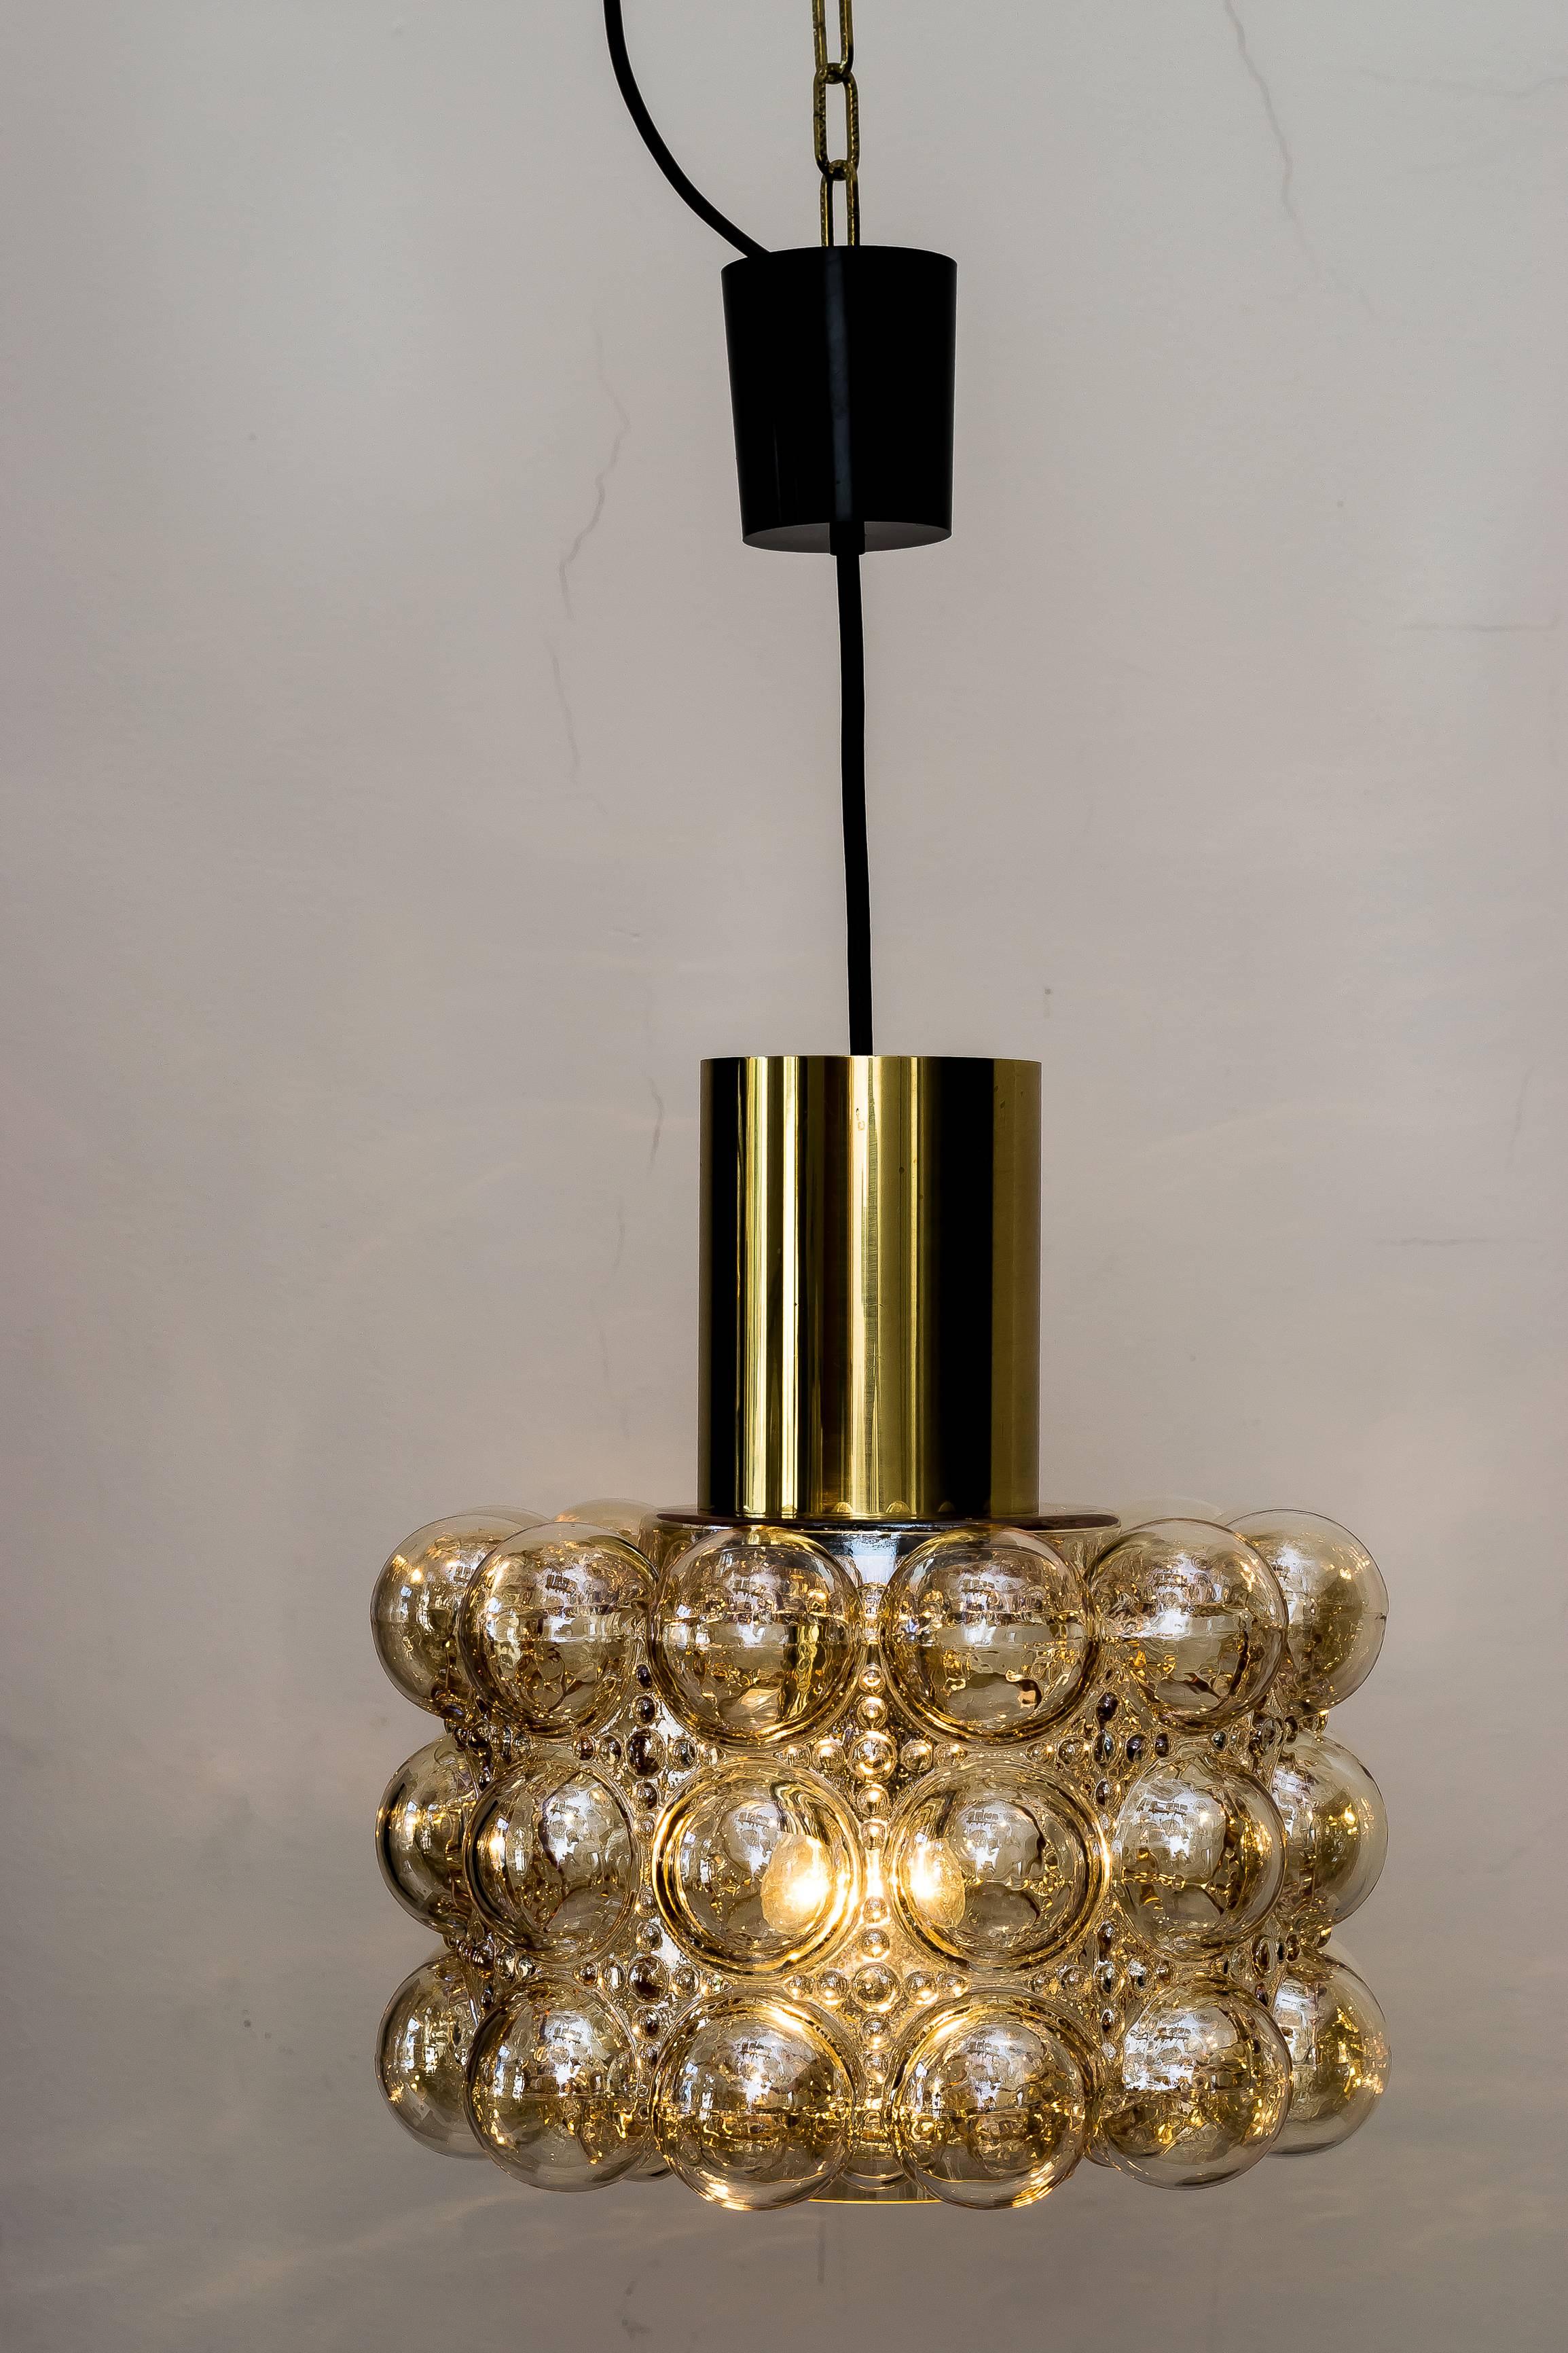 Beautiful pendant with bubble glass by Helena Tynell for Limburg
Very good original condition.
 